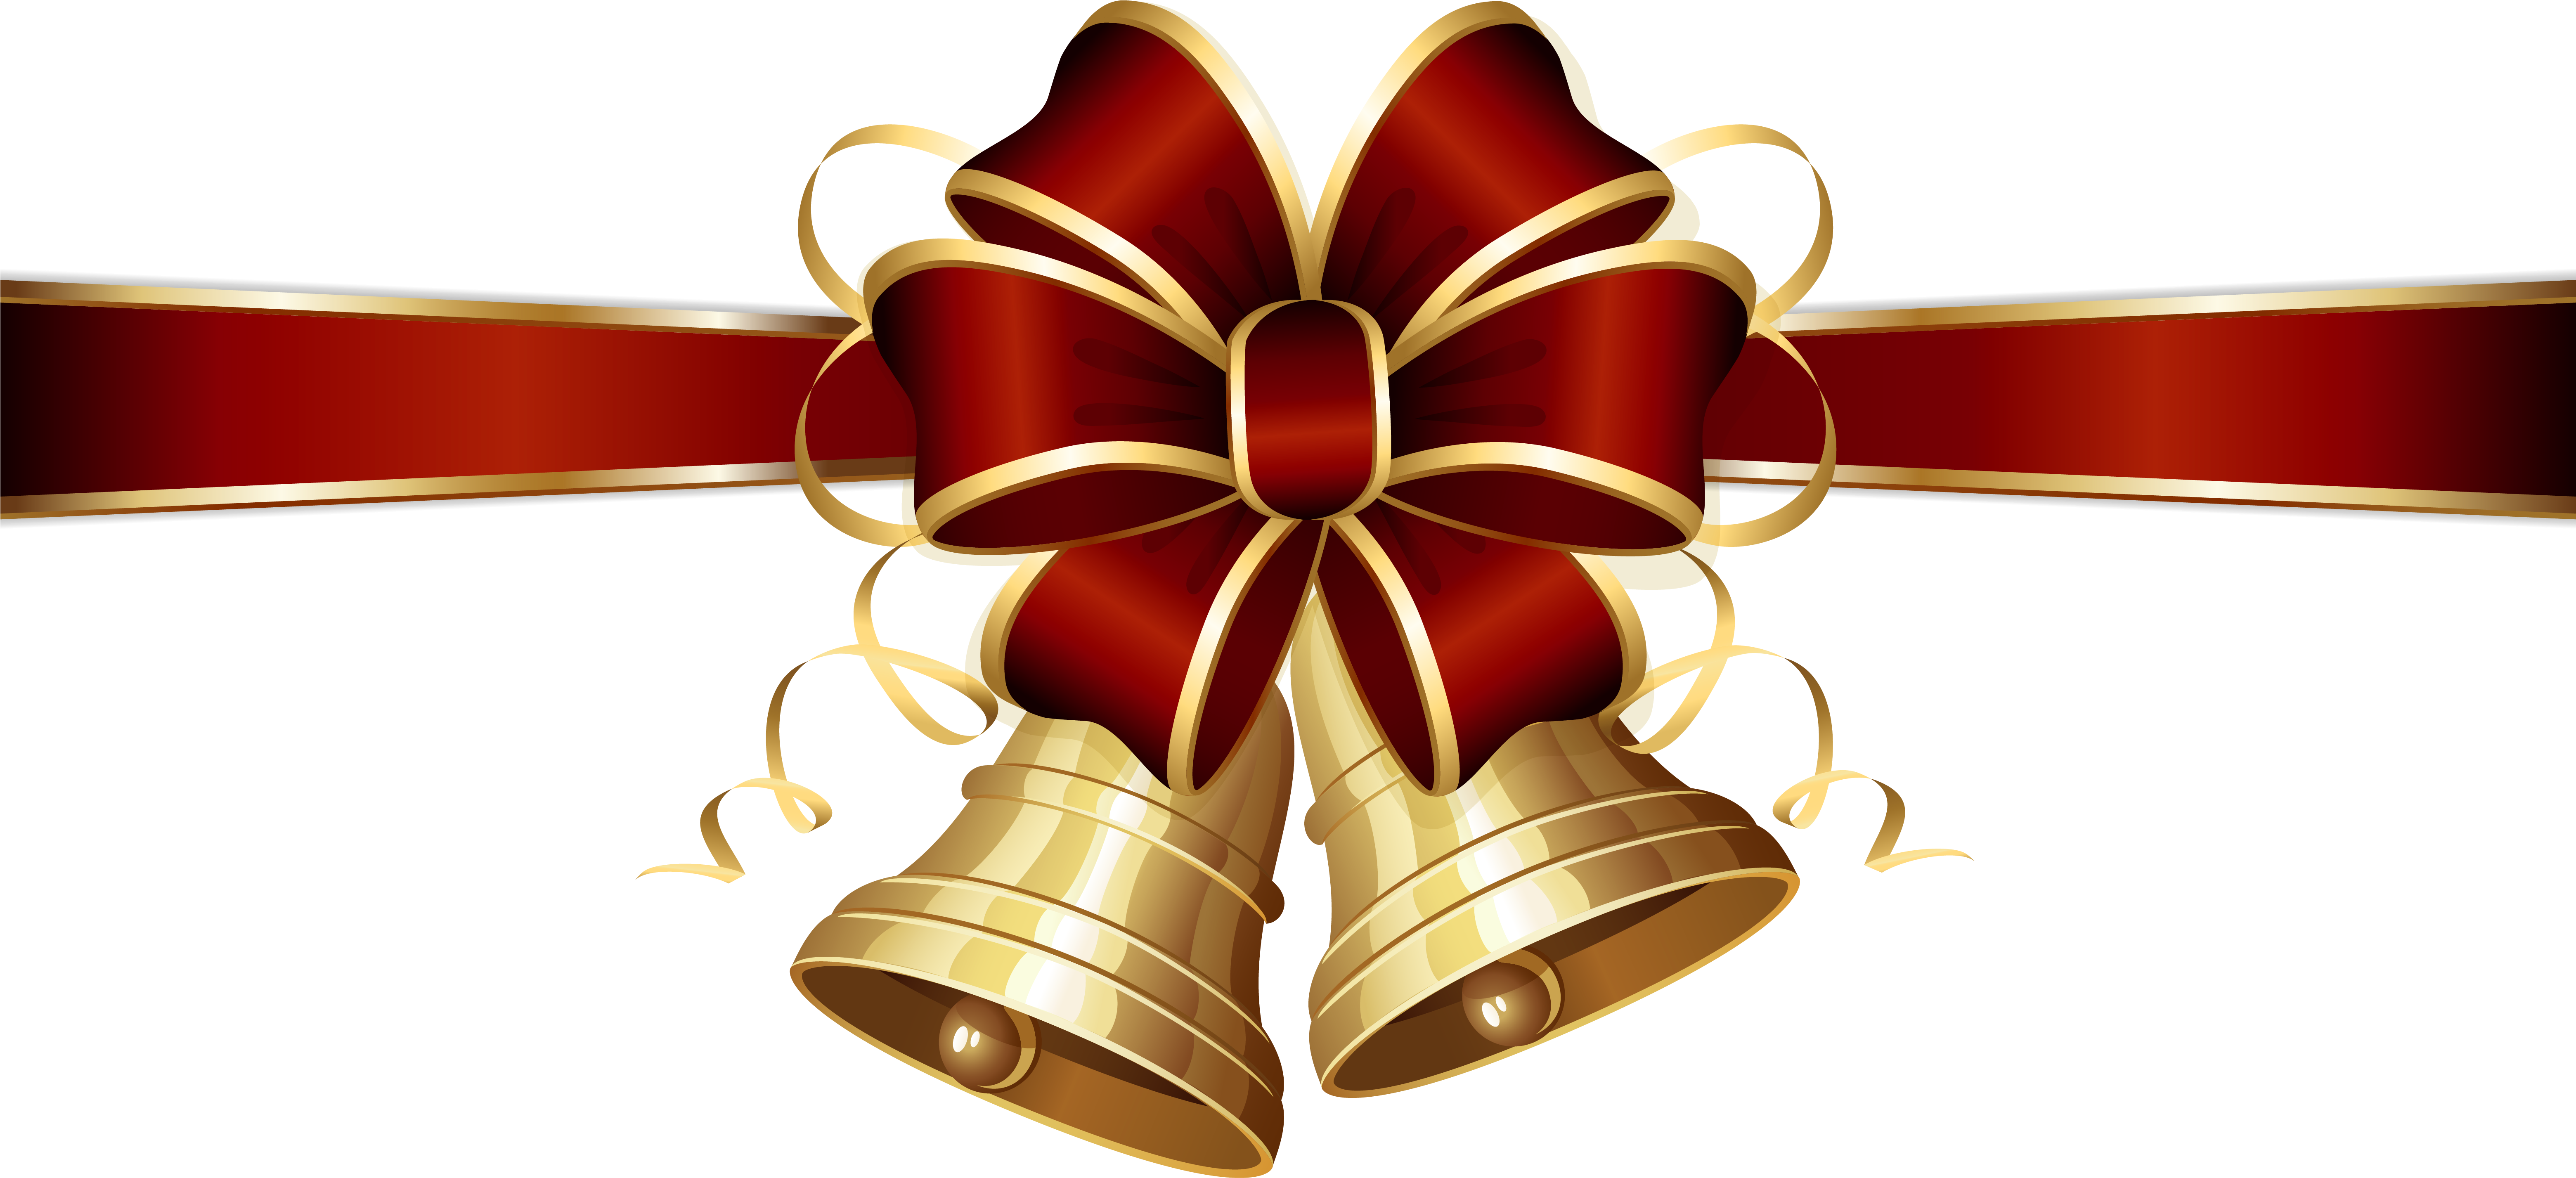 Christmas Bells And Red Bow Png Clipart Image - Christmas Bells ...